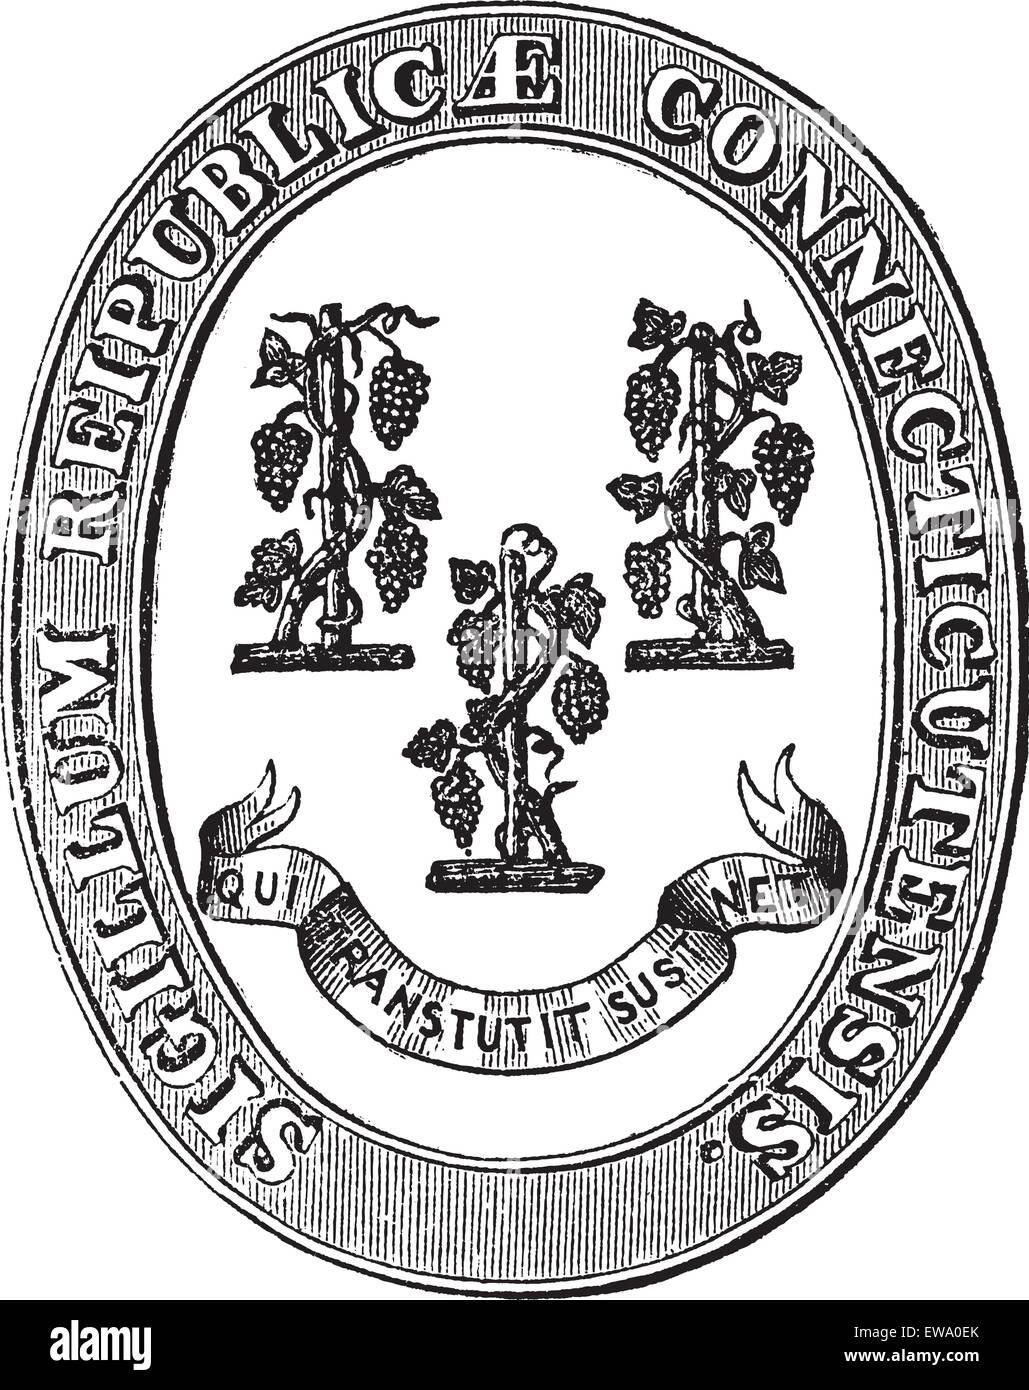 Seal of Connecticut, vintage engraving. Old engraved illustration of the Seal of Connecticut. Stock Vector